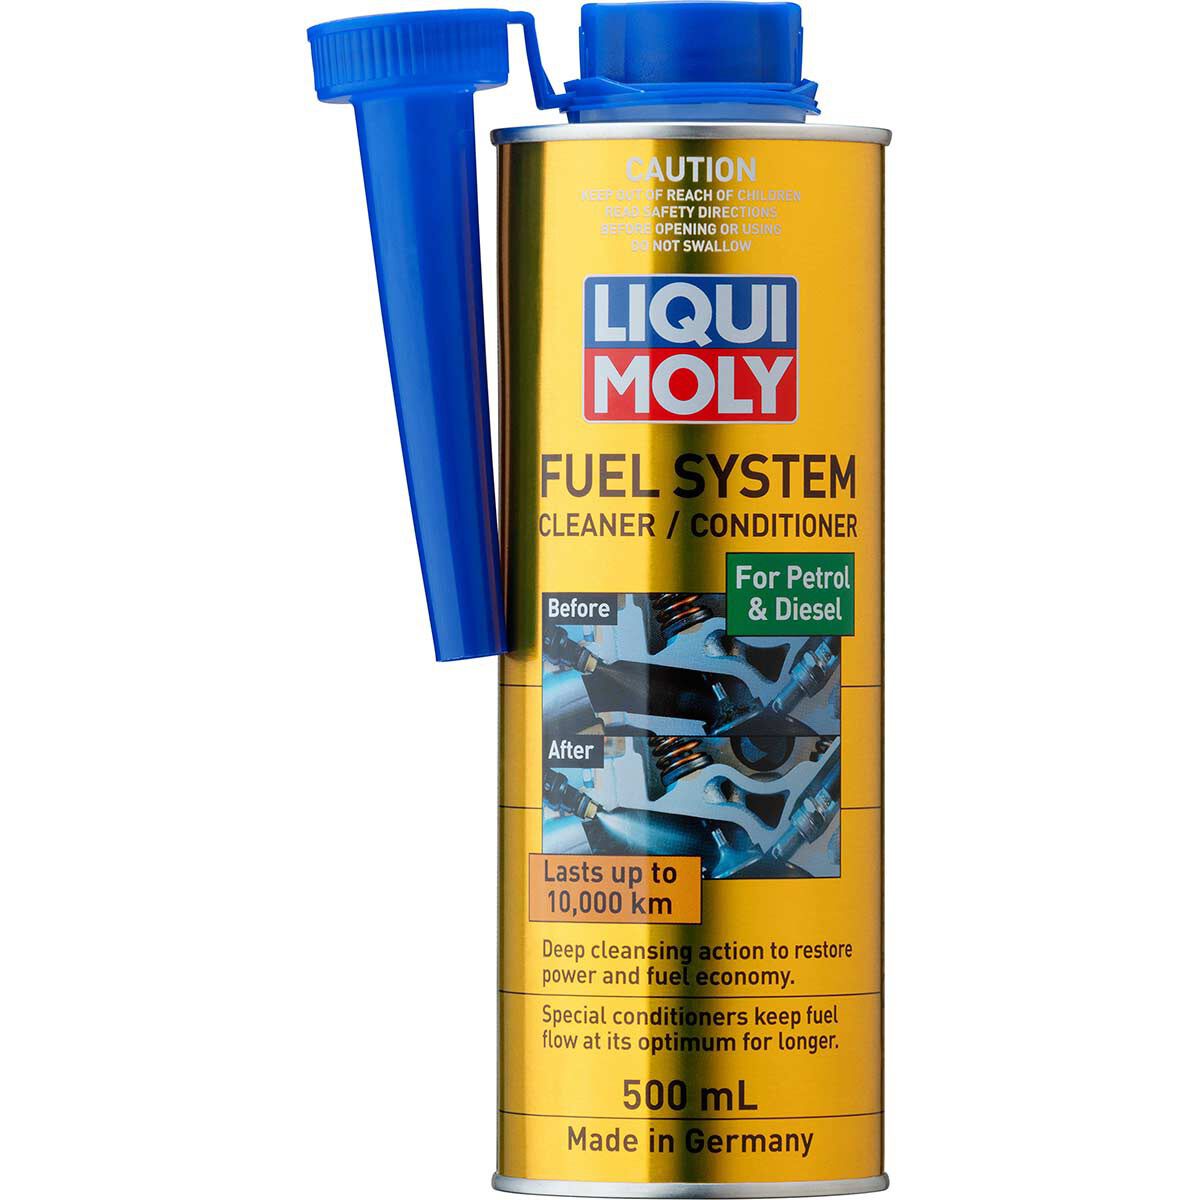 LIQUI MOLY Fuel System Cleaner/Conditioner 500mL